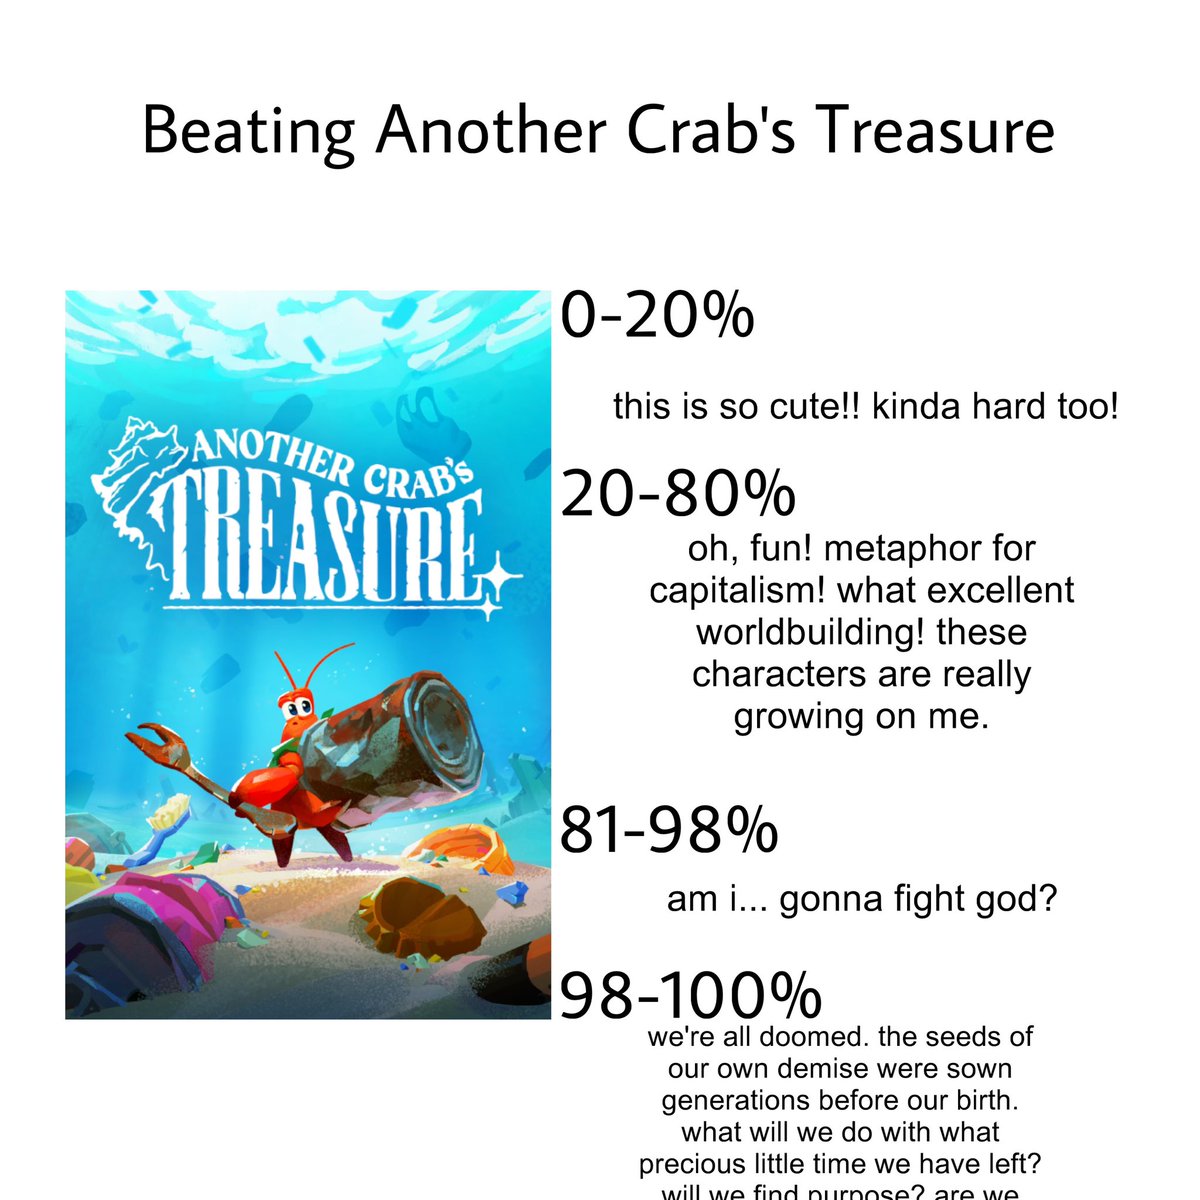 Just beat Another Crab’s Treasure